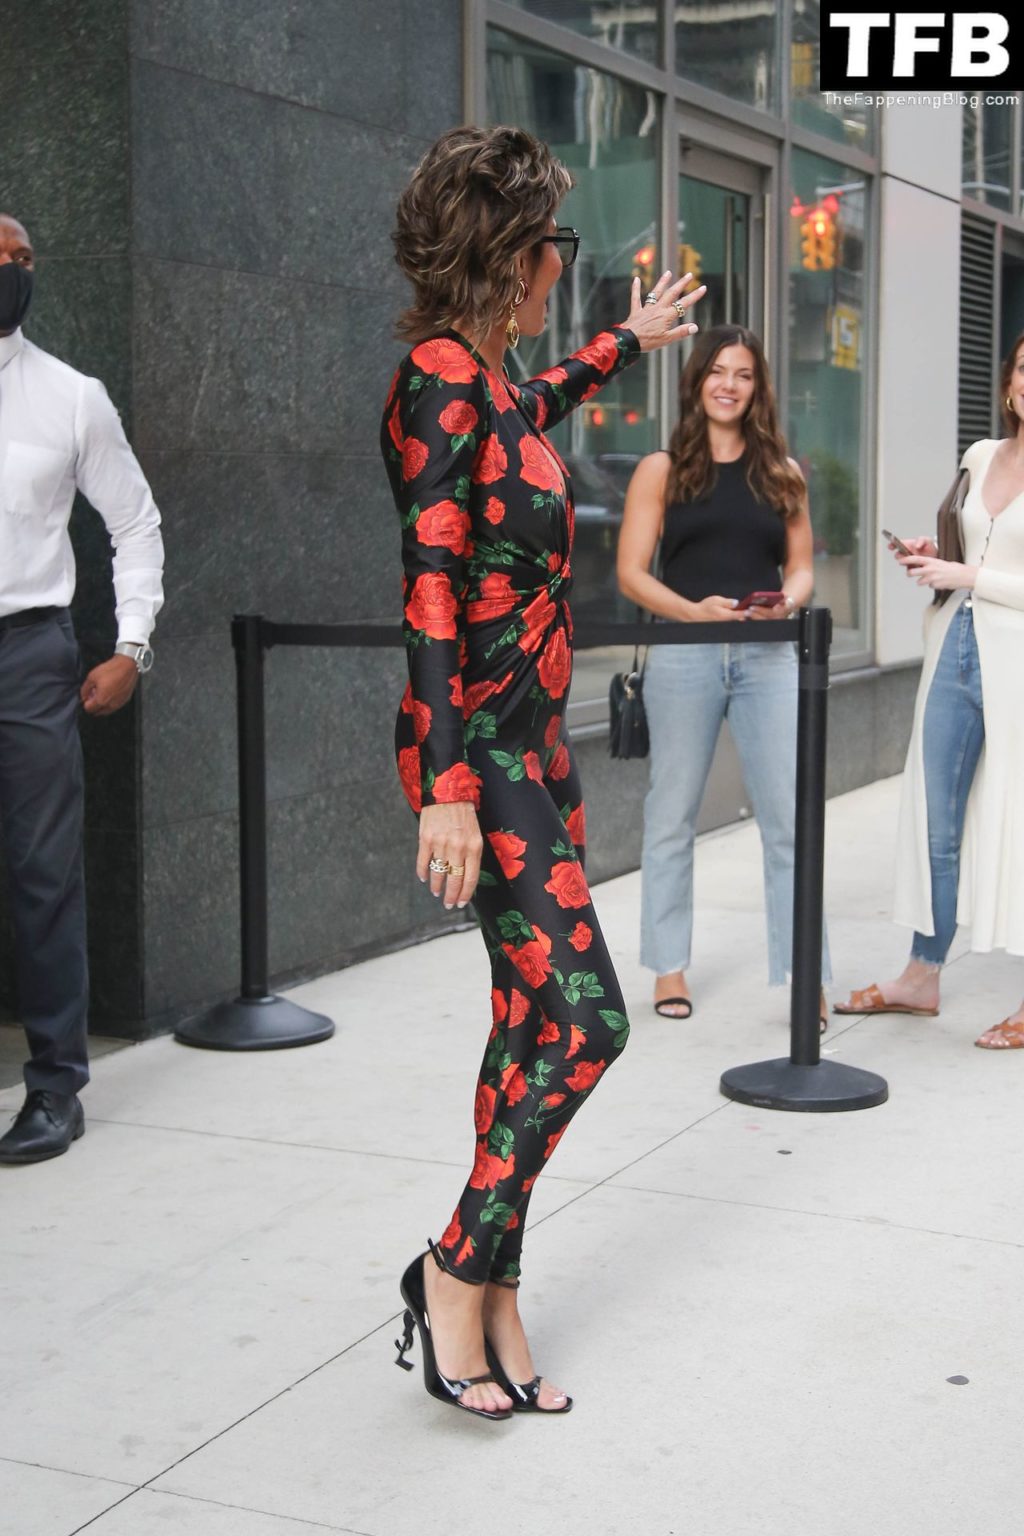 Lisa Rinna Rocks a Head-to-Toe YSL Look Arriving to Watch What Happens Live in NYC (52 Photos)